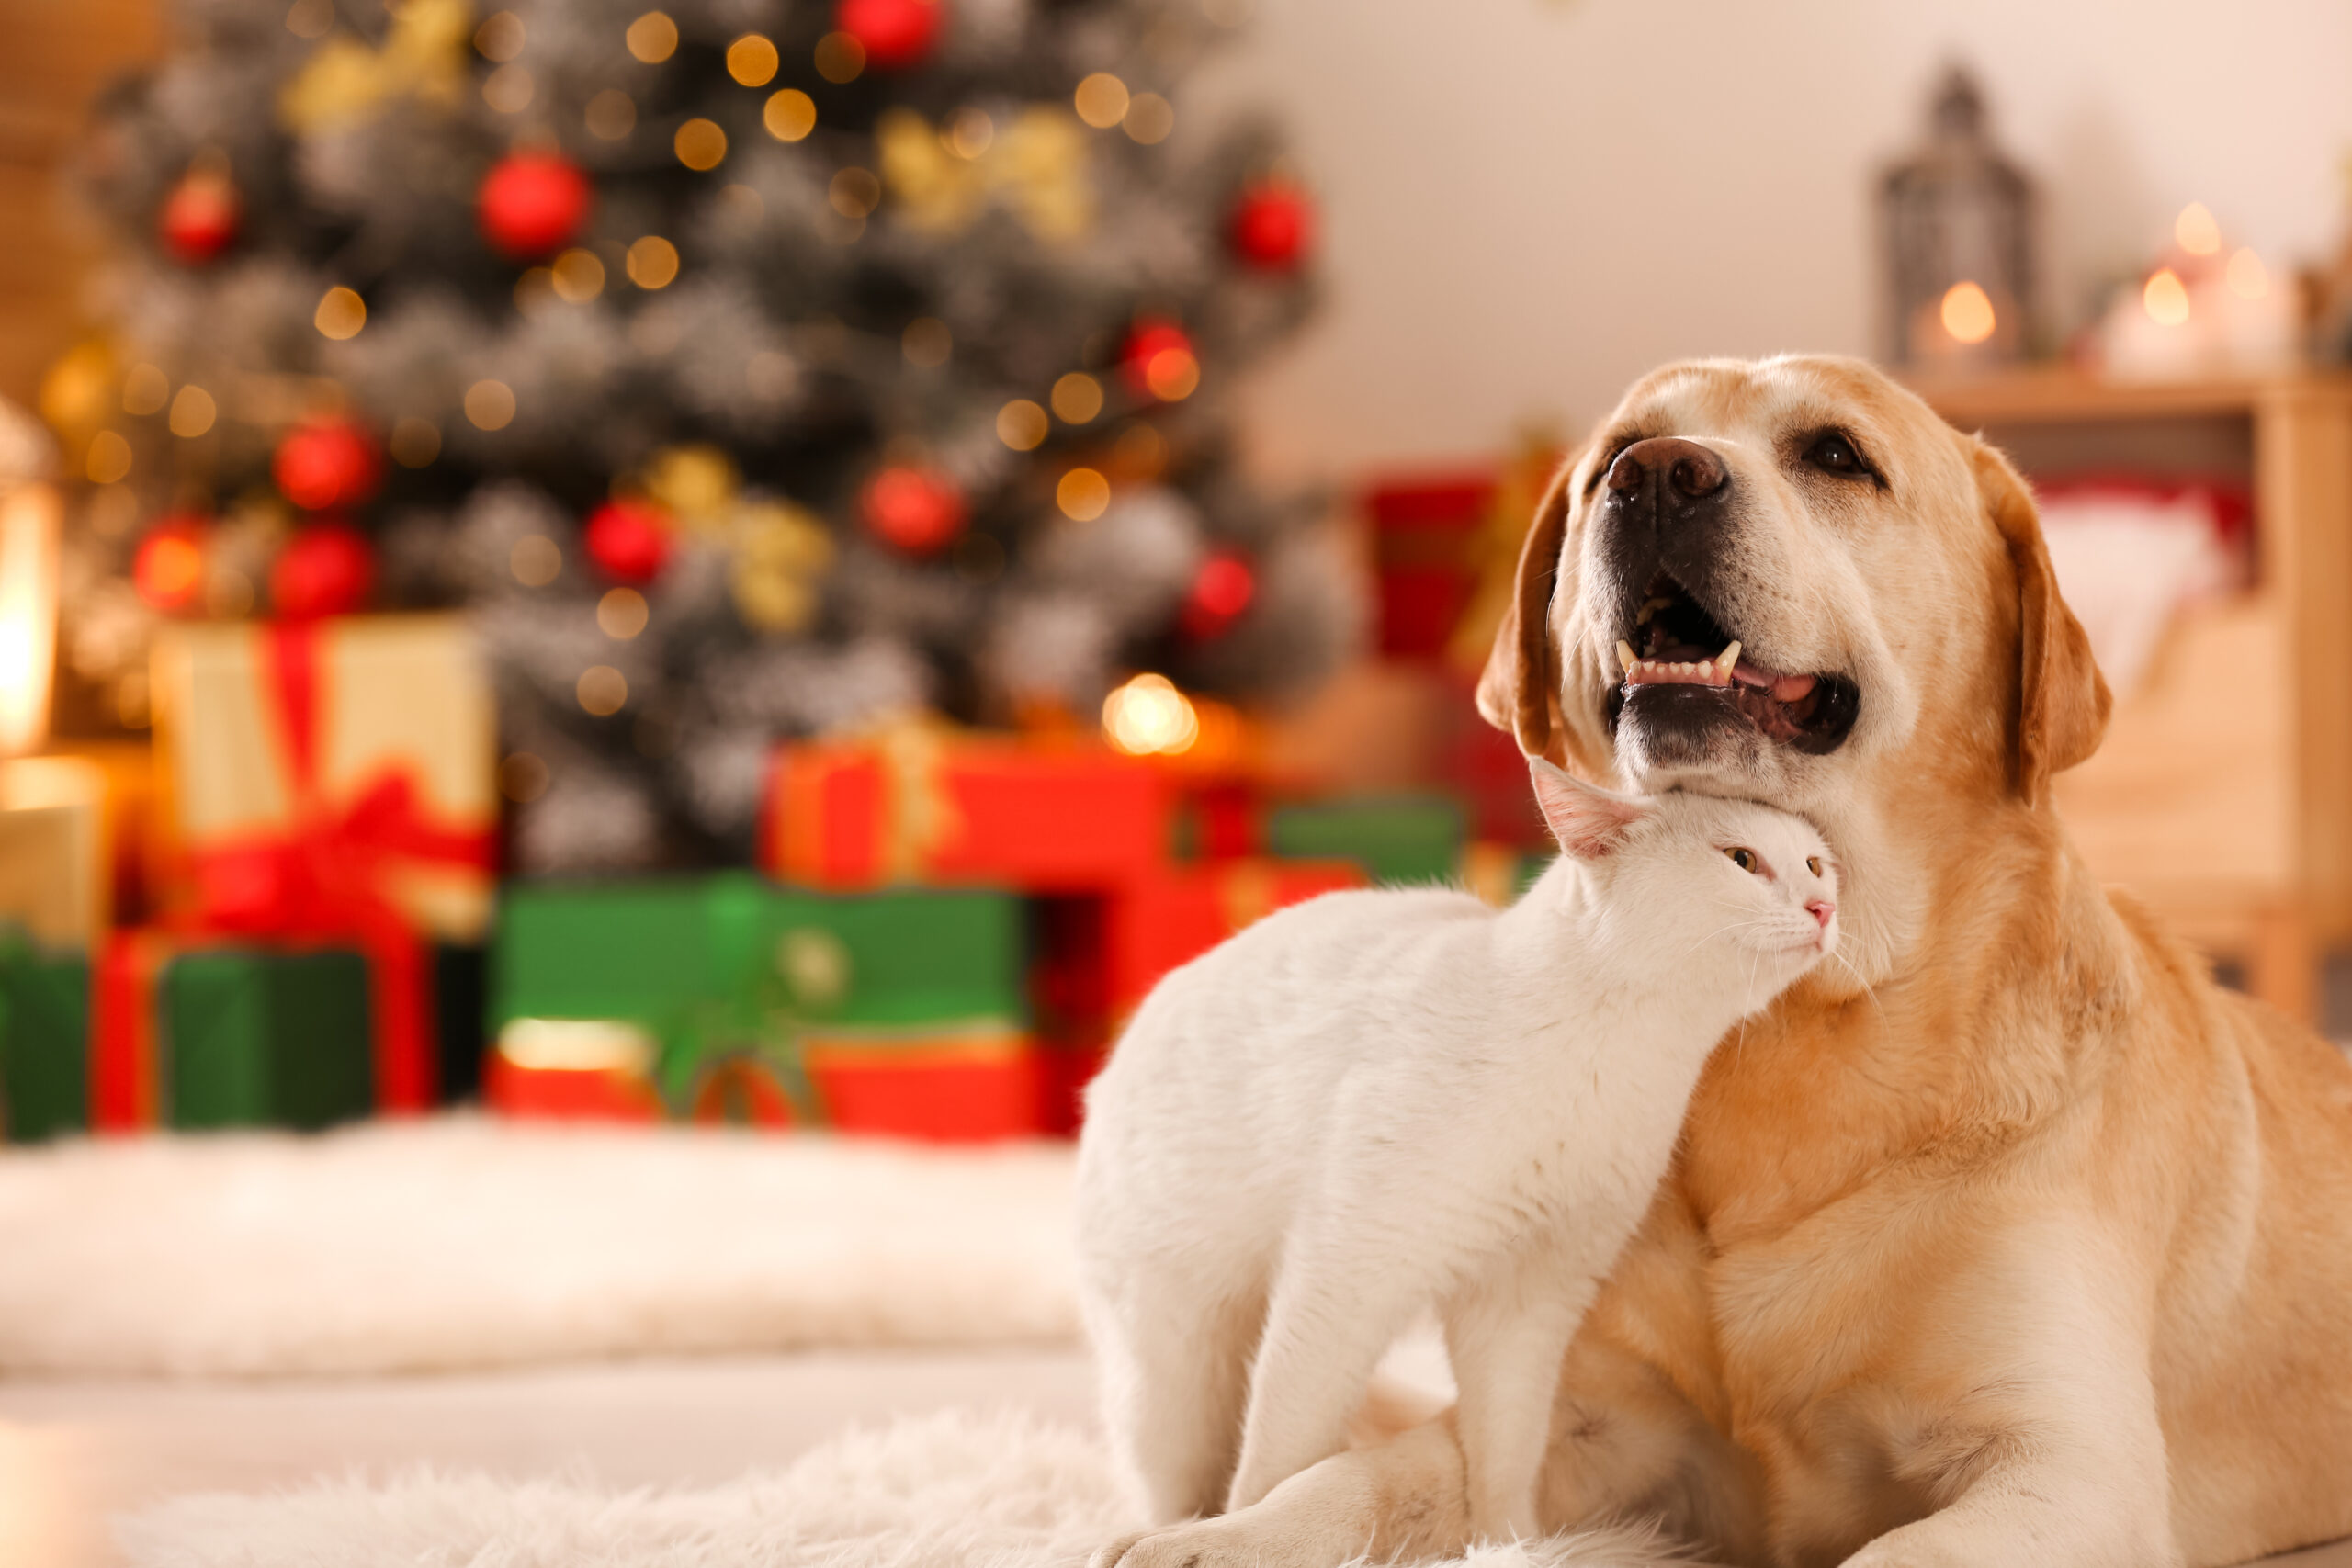 Labrador dog and white short haired cat cuddled up together in room decorated for Christmas, with a Christmas Tree with red lights and green, gold and red presents beneath it